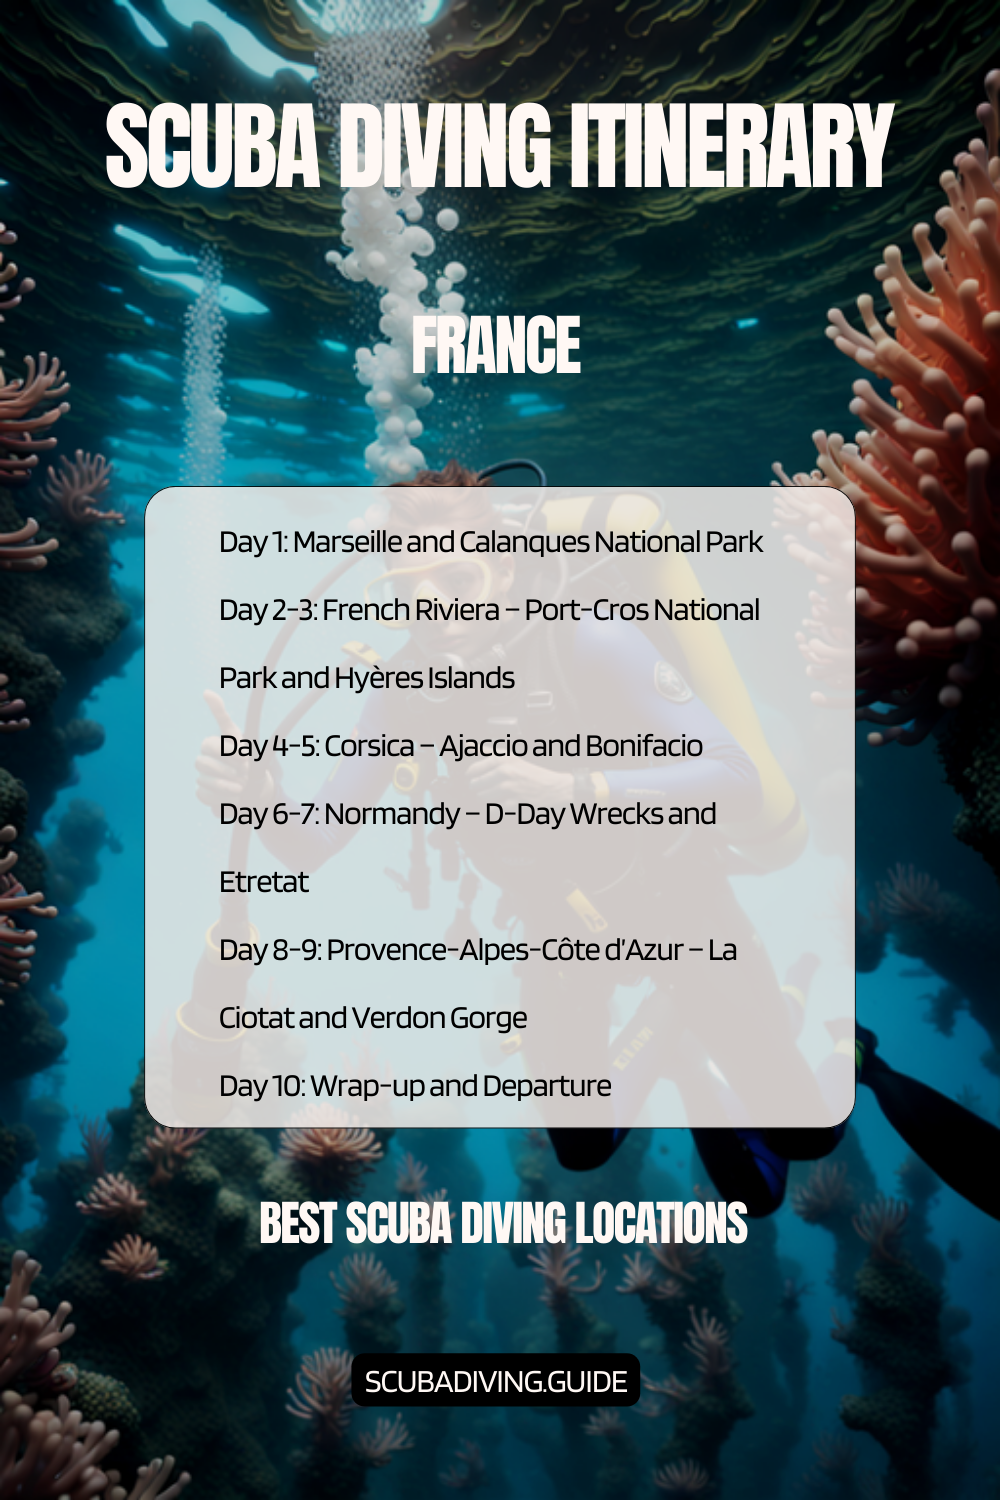 France Recommended Scuba Diving Itinerary